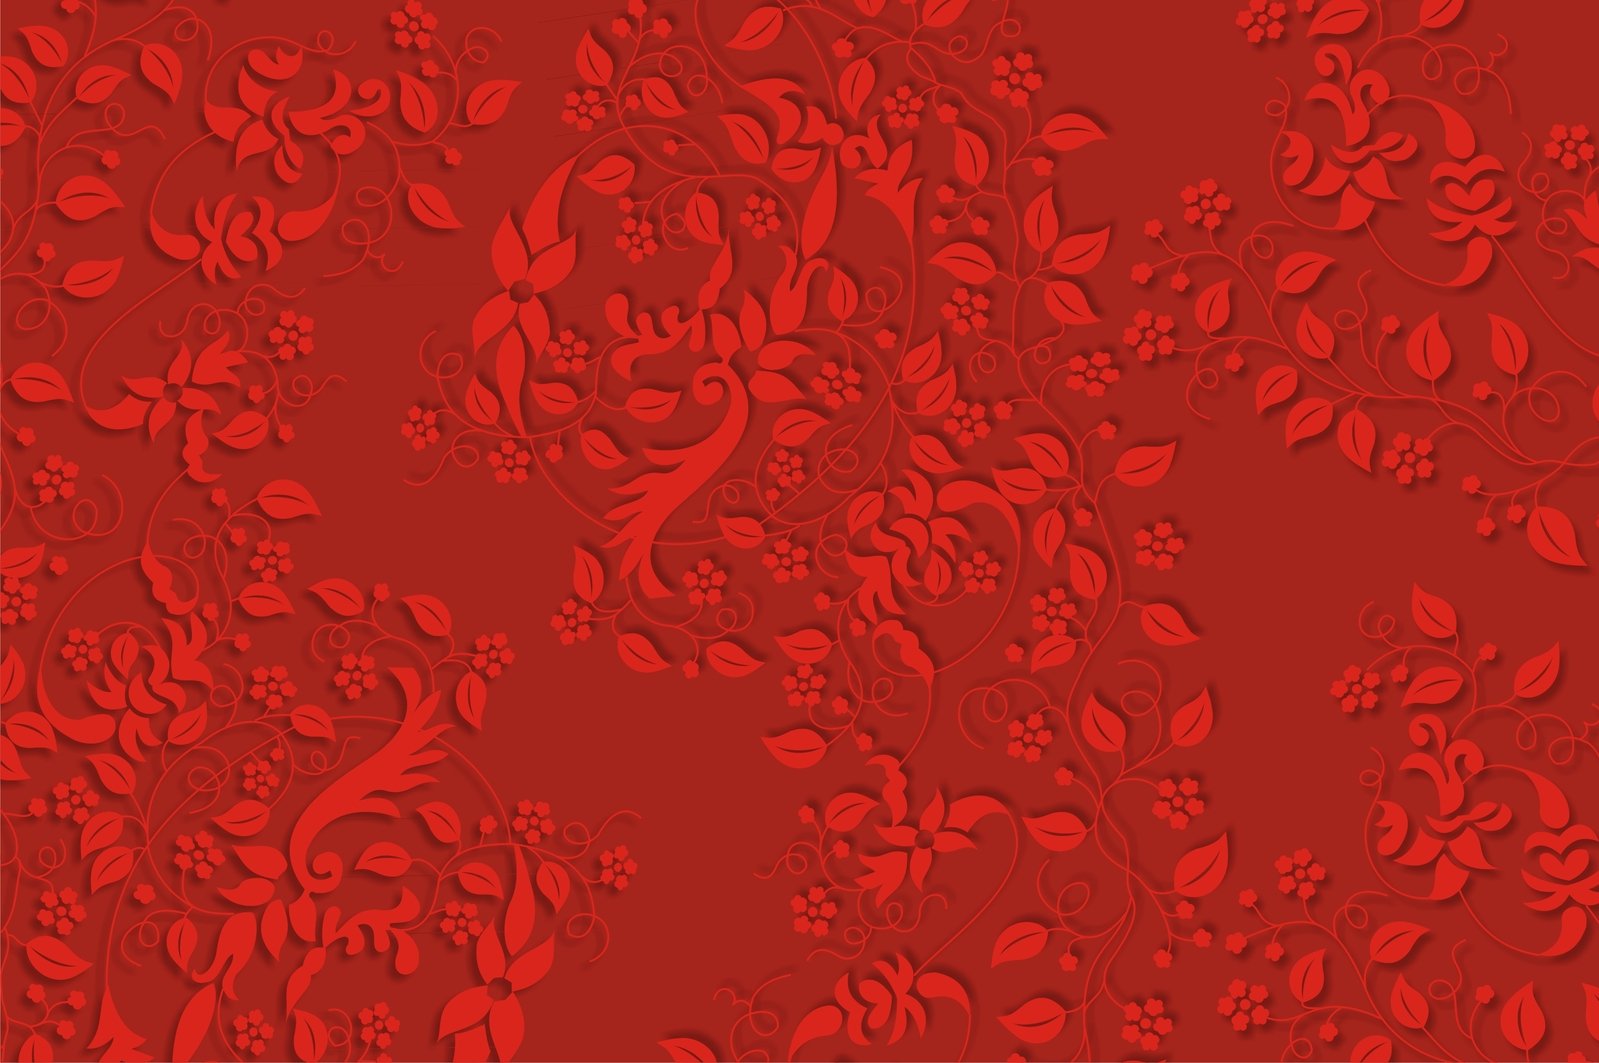 an orange and red flower background with birds